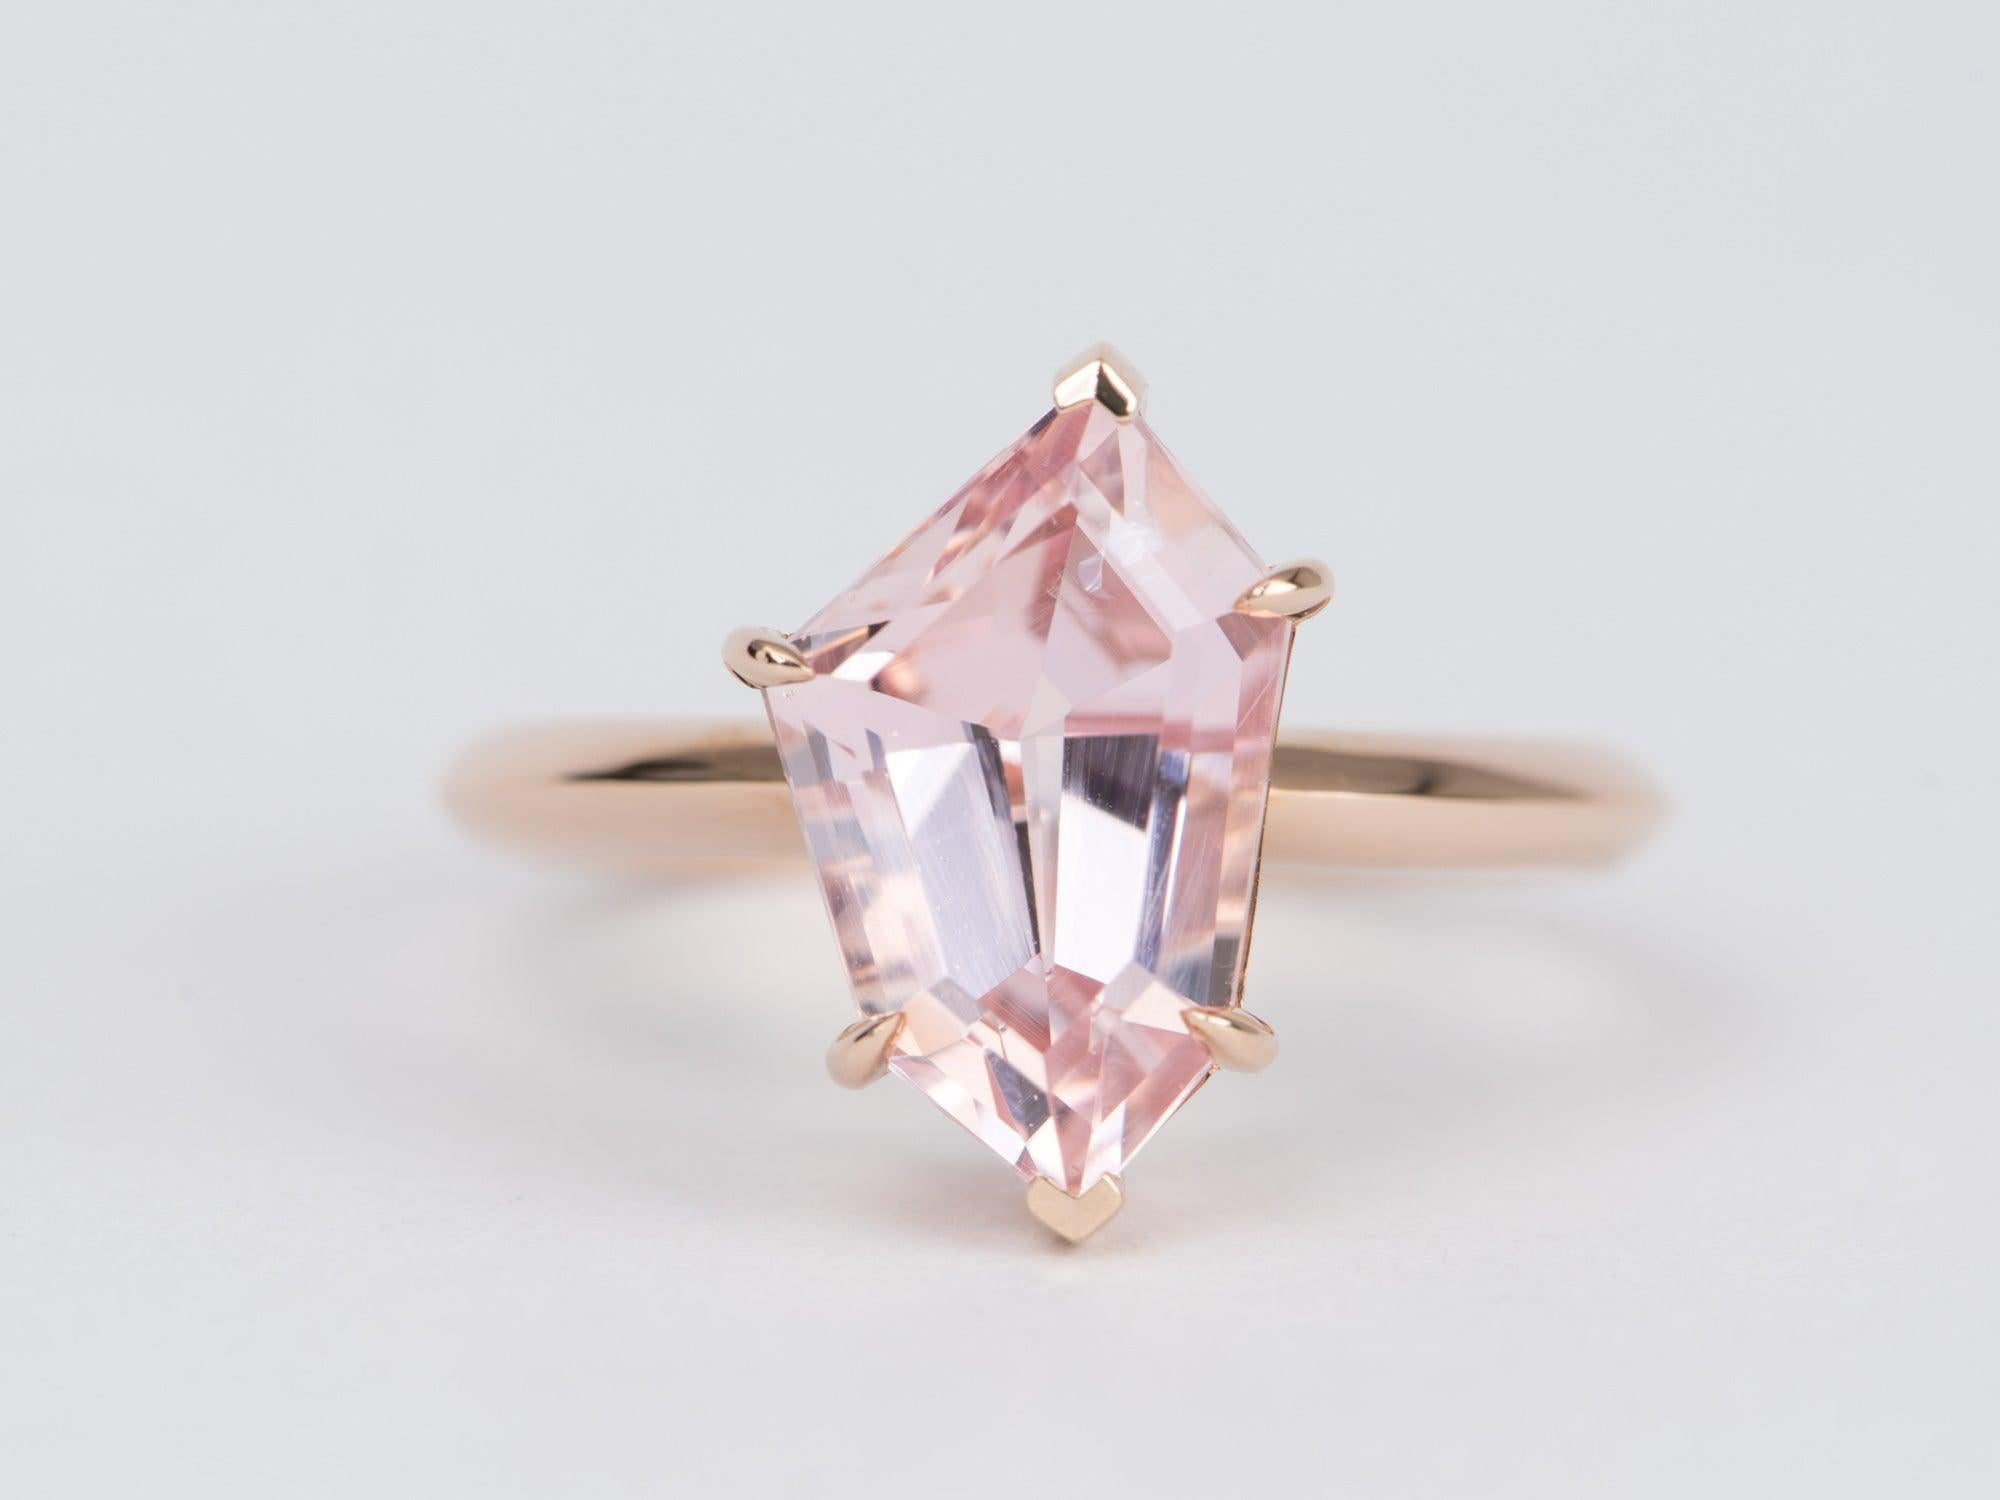 ♥ Solid 14K gold ring set with a pink geometric-shaped morganite
♥ The setting measures 14.4mm in length, 9.6 in width, 7mm in height

♥ Ring size: US 7 (Free resizing up or down 1 size)
♥ Ring width: 2.2mm
♥ Gemstone: Morganite 3.42ct

♥ Free